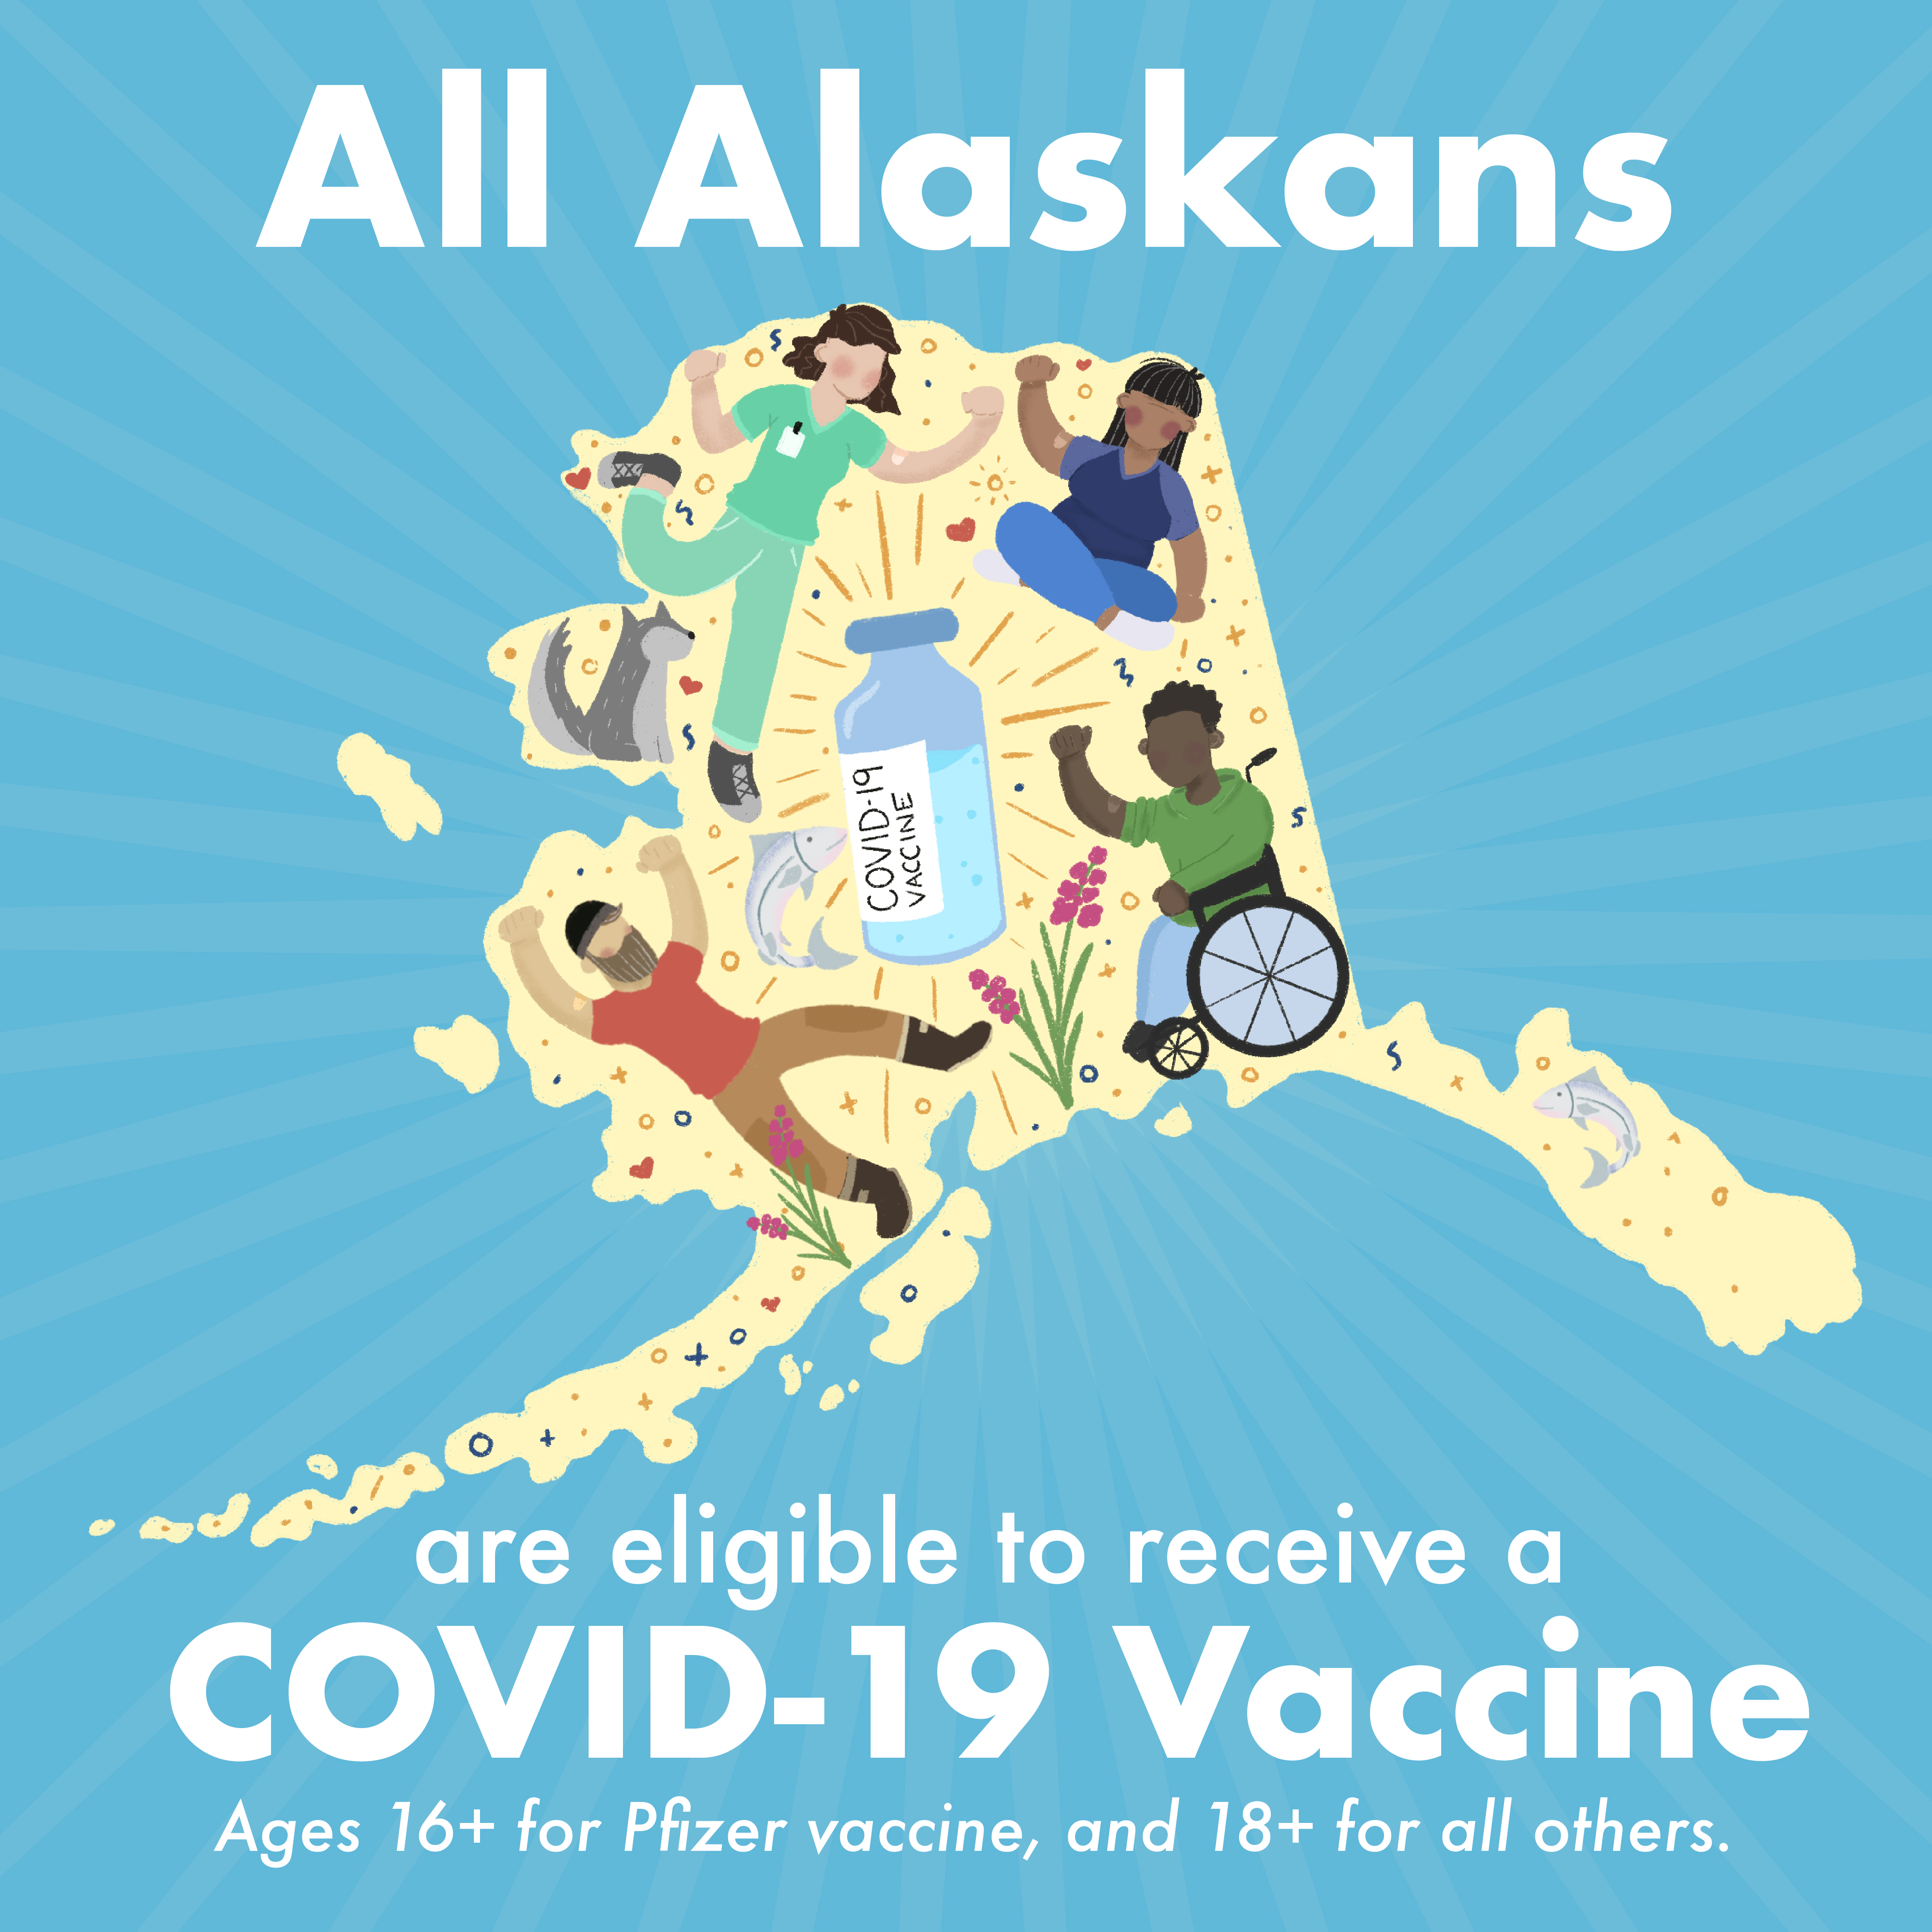 All Alaskans are eligible to receive a COVID-19 vaccine. Ages 16+ for Pzifer and 18+ for others.